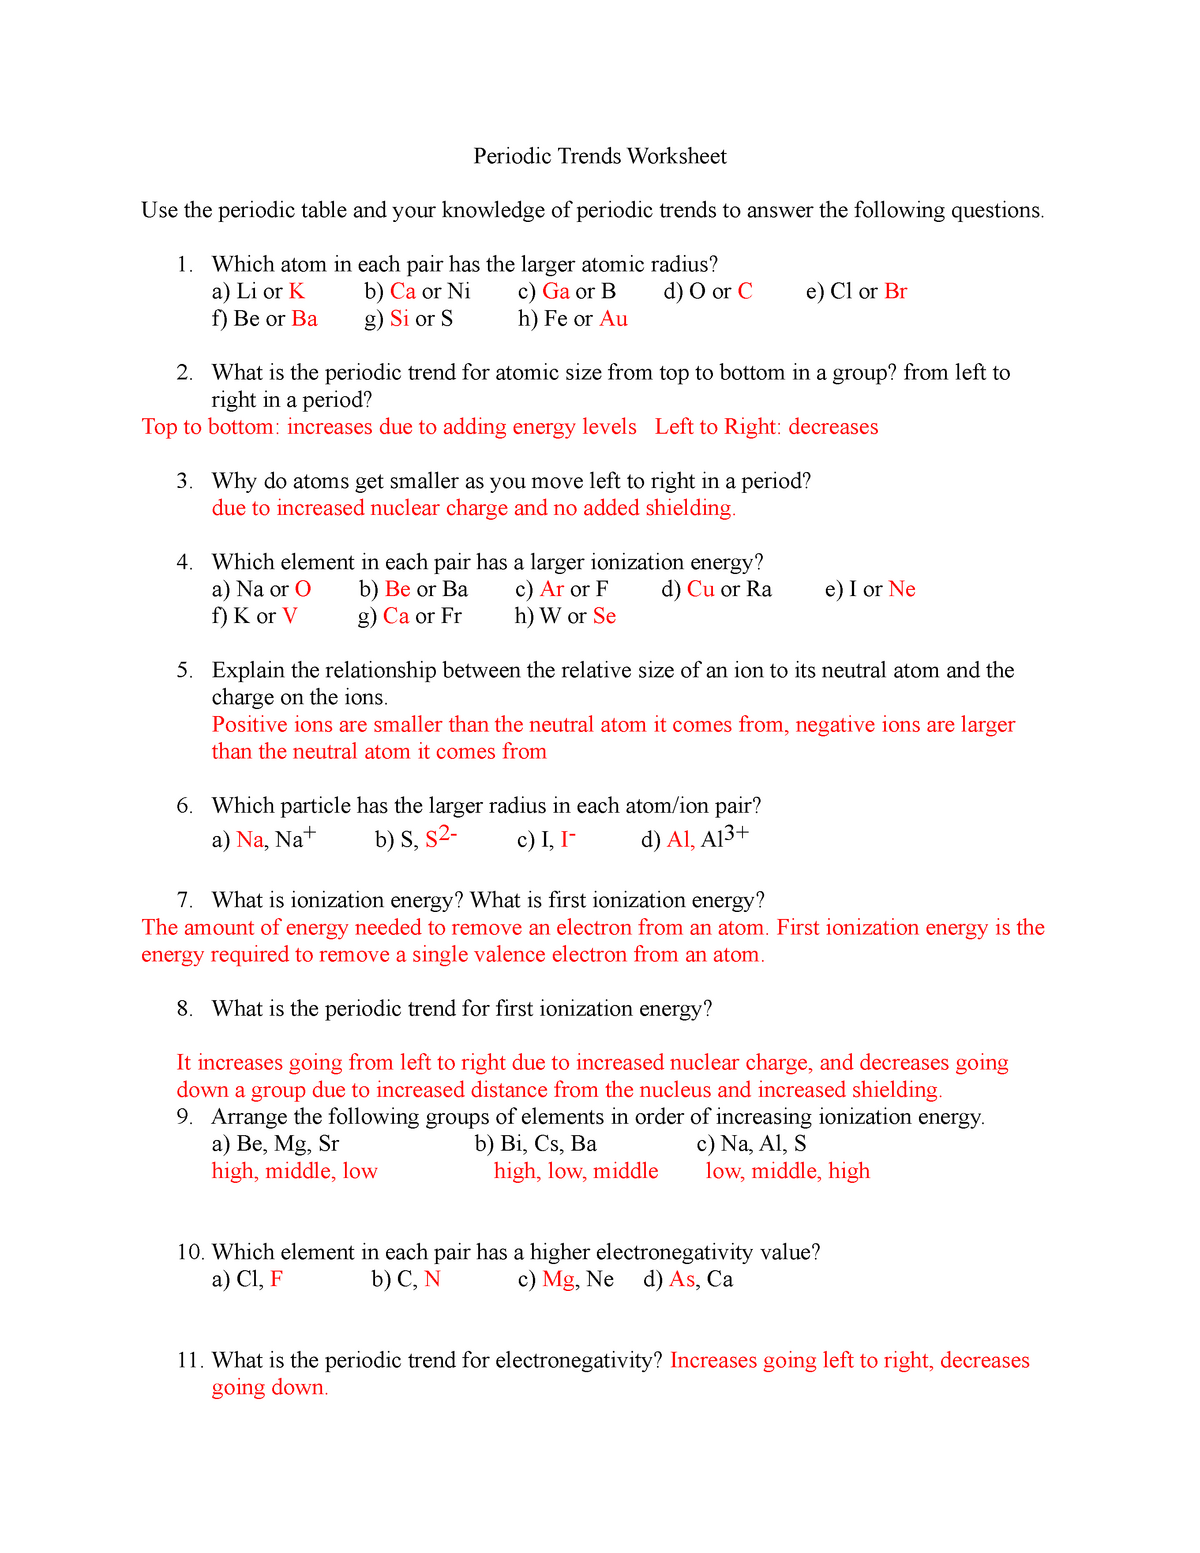 Periodic Trends Worksheet 20 answers - 020:2060:20620 - General Pertaining To Worksheet Periodic Trends Answers